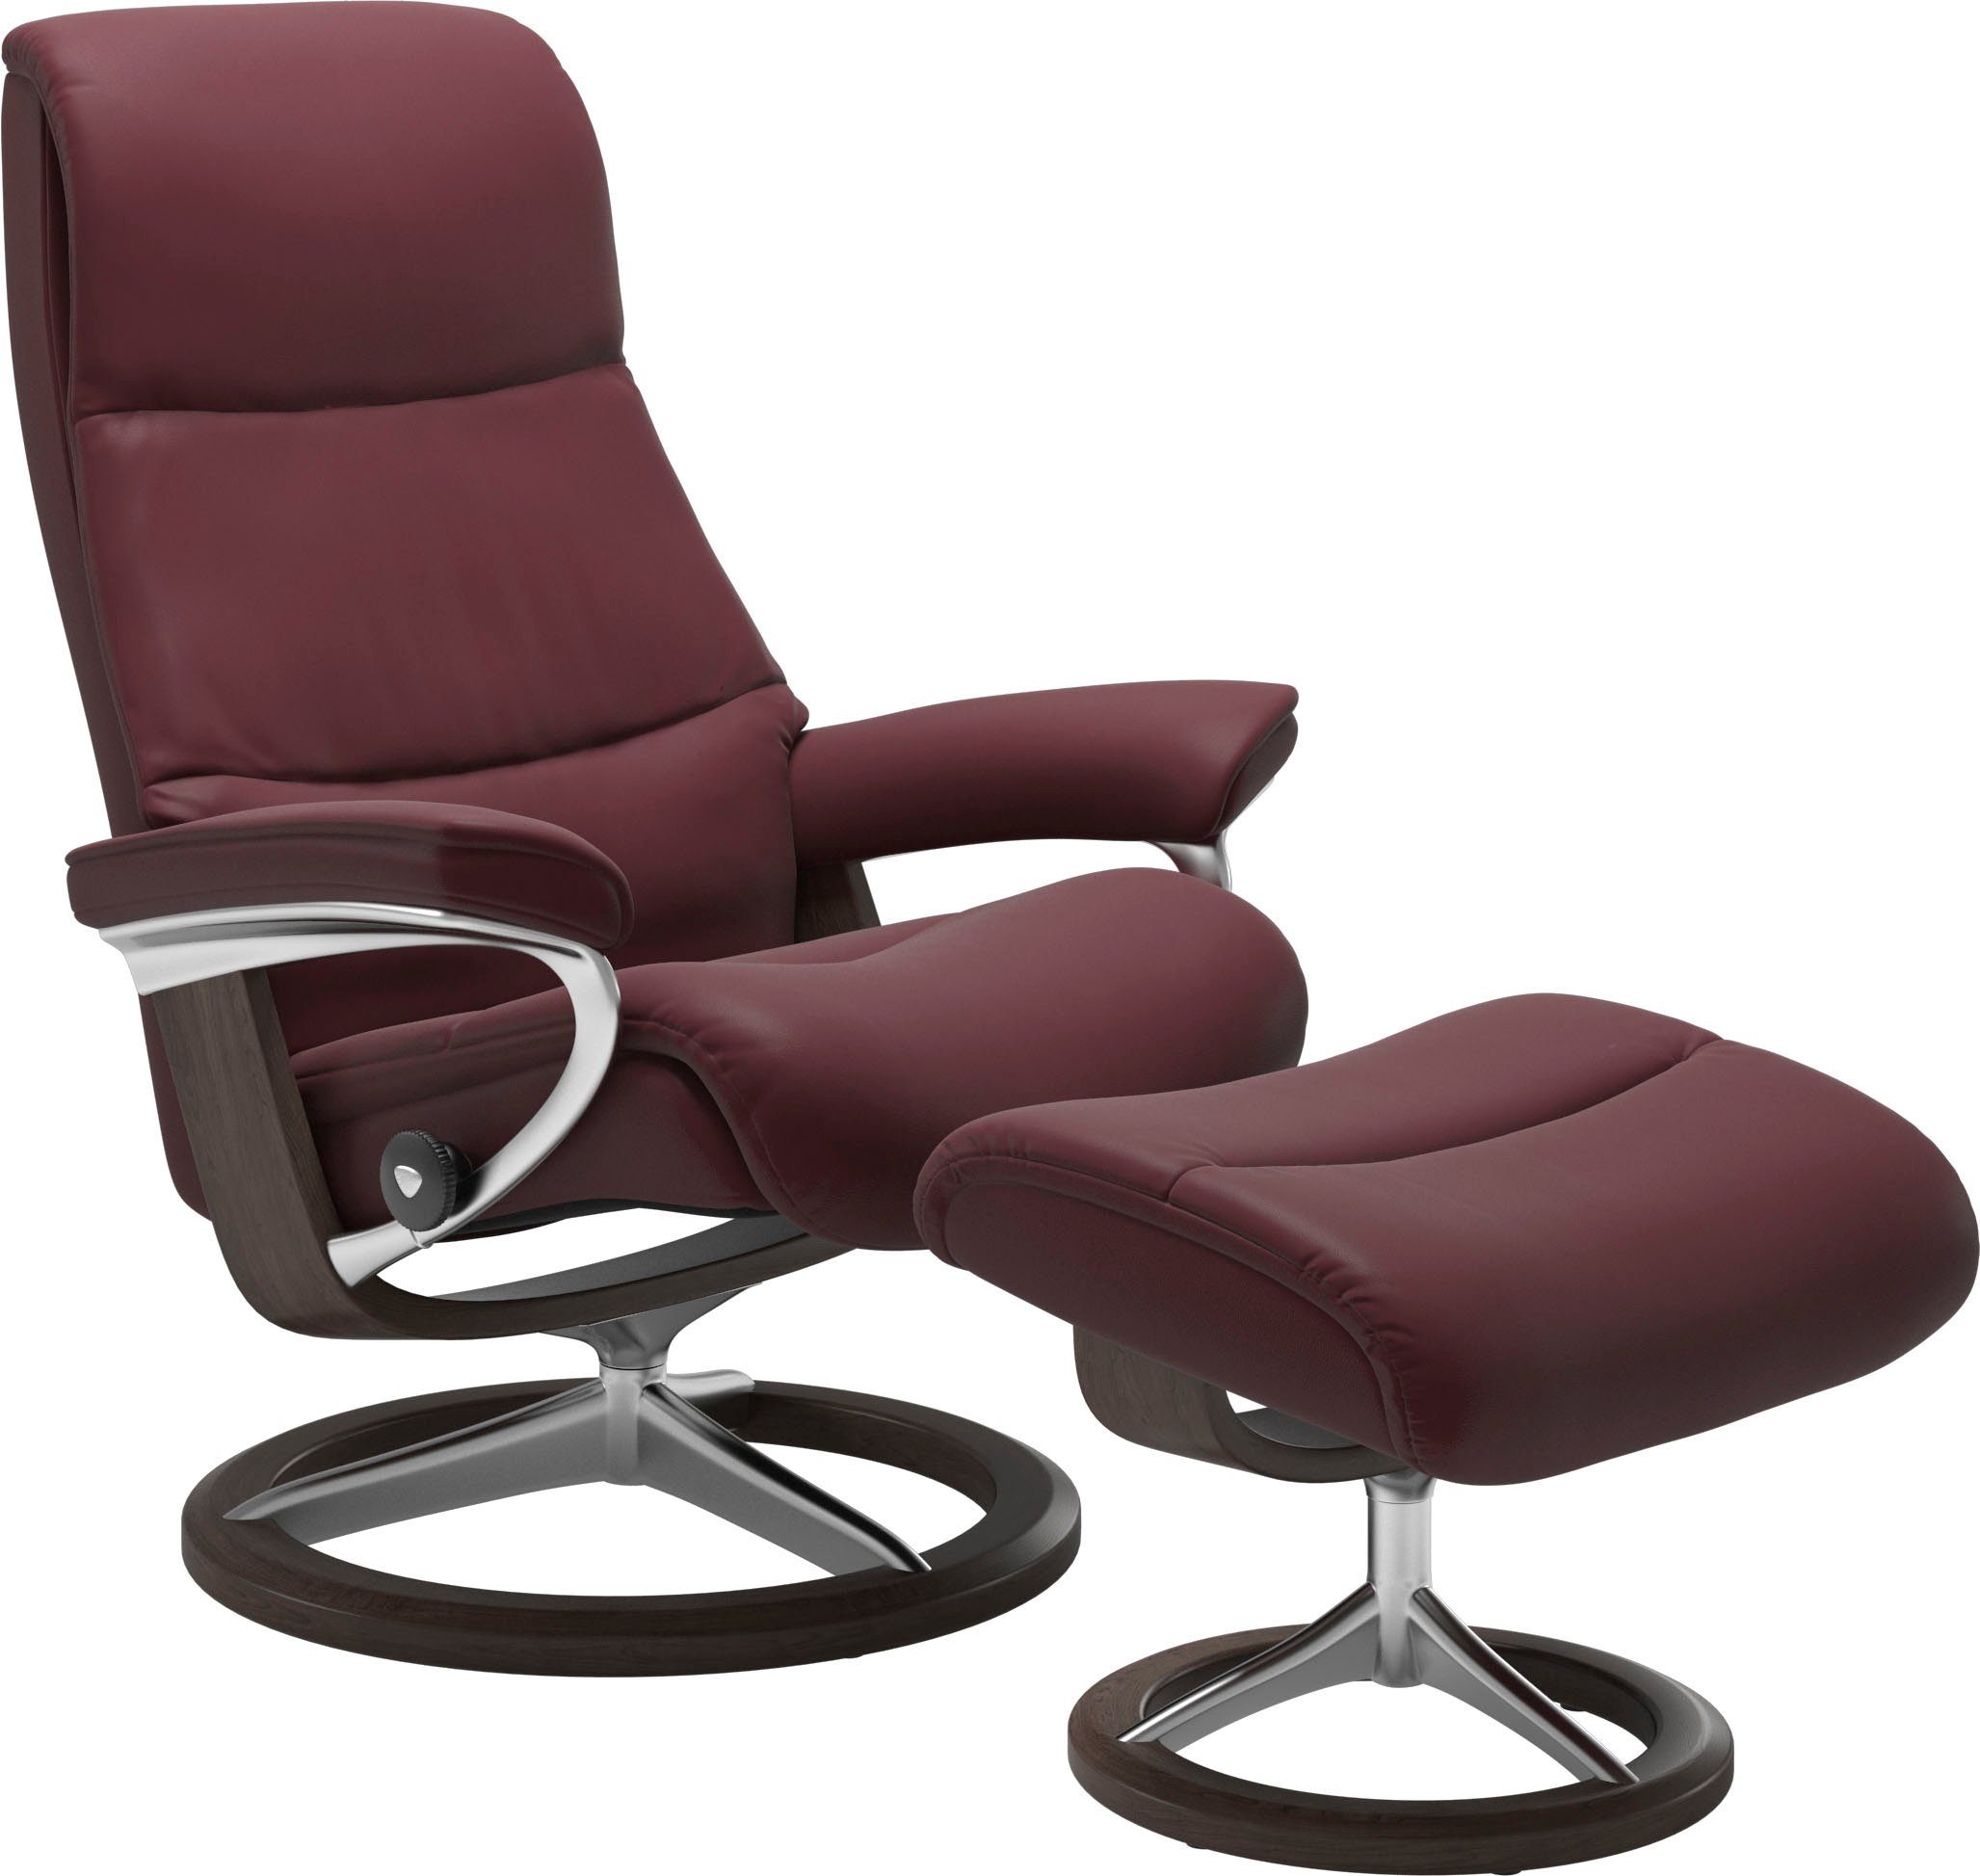 Relaxsessel Wenge Größe Base, Stressless® S,Gestell View, Signature mit